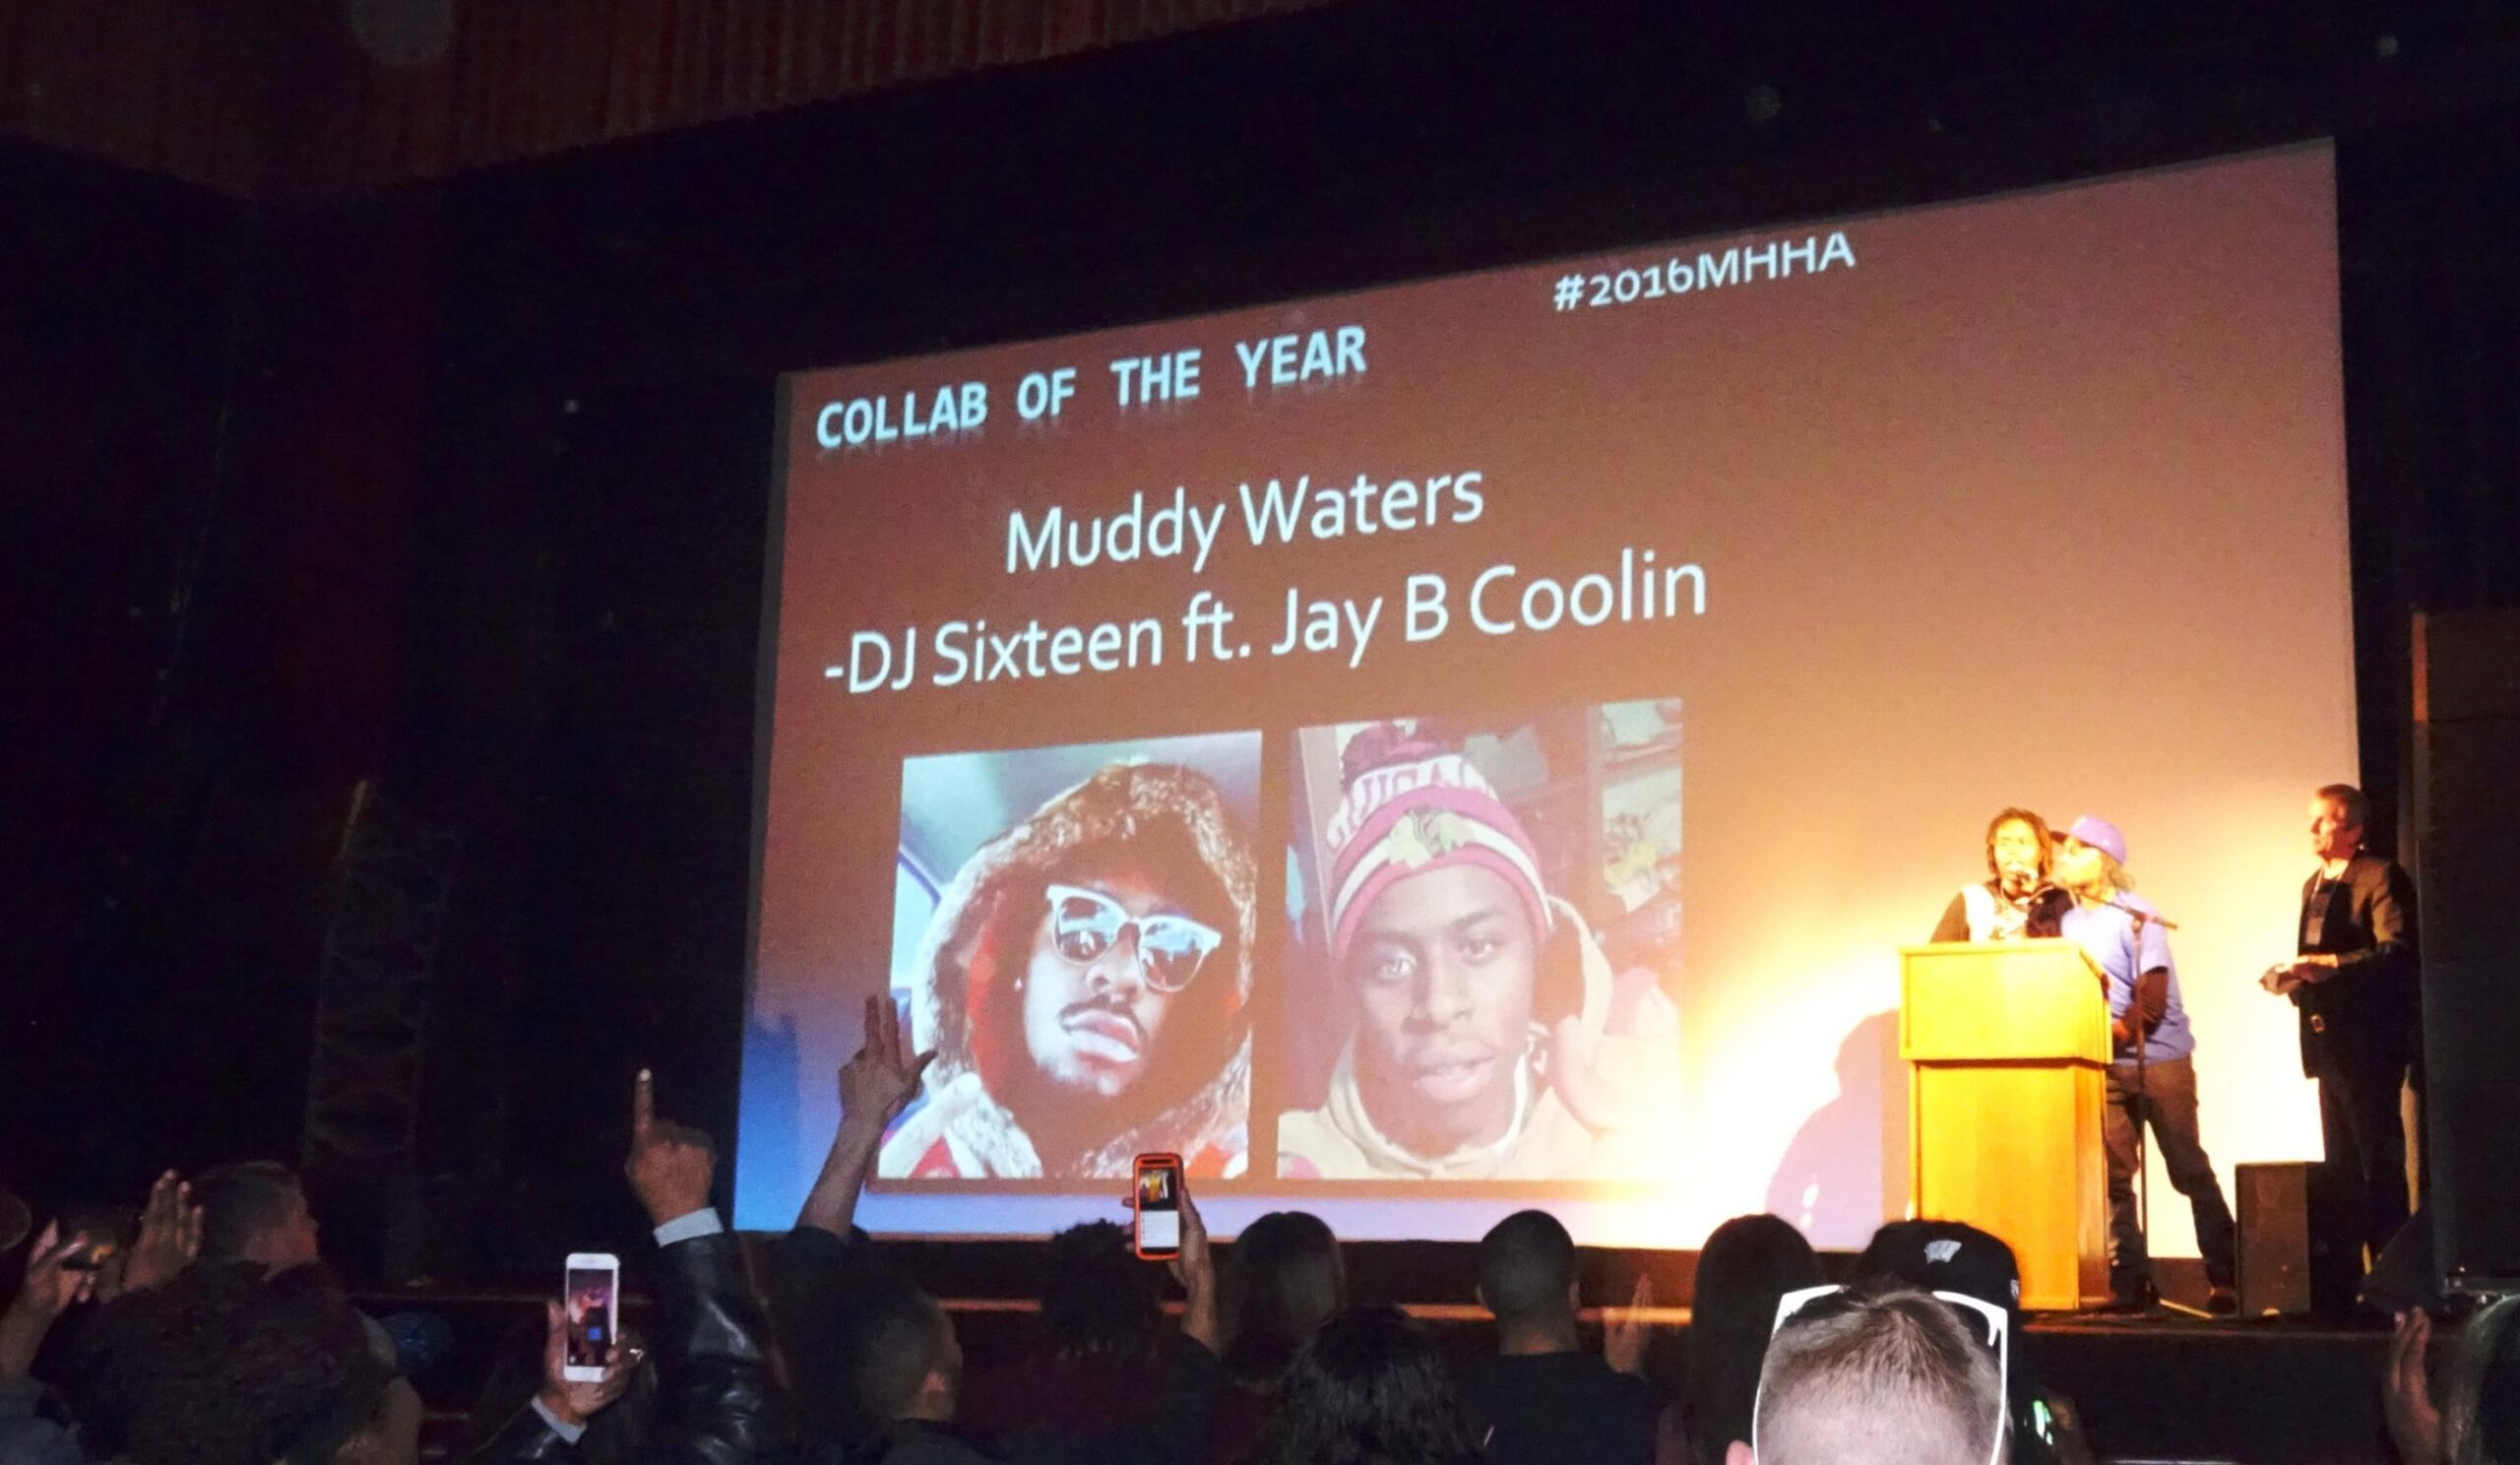 DJ Sixteen & Jay B Coolin accepting the award for Collab of the Year